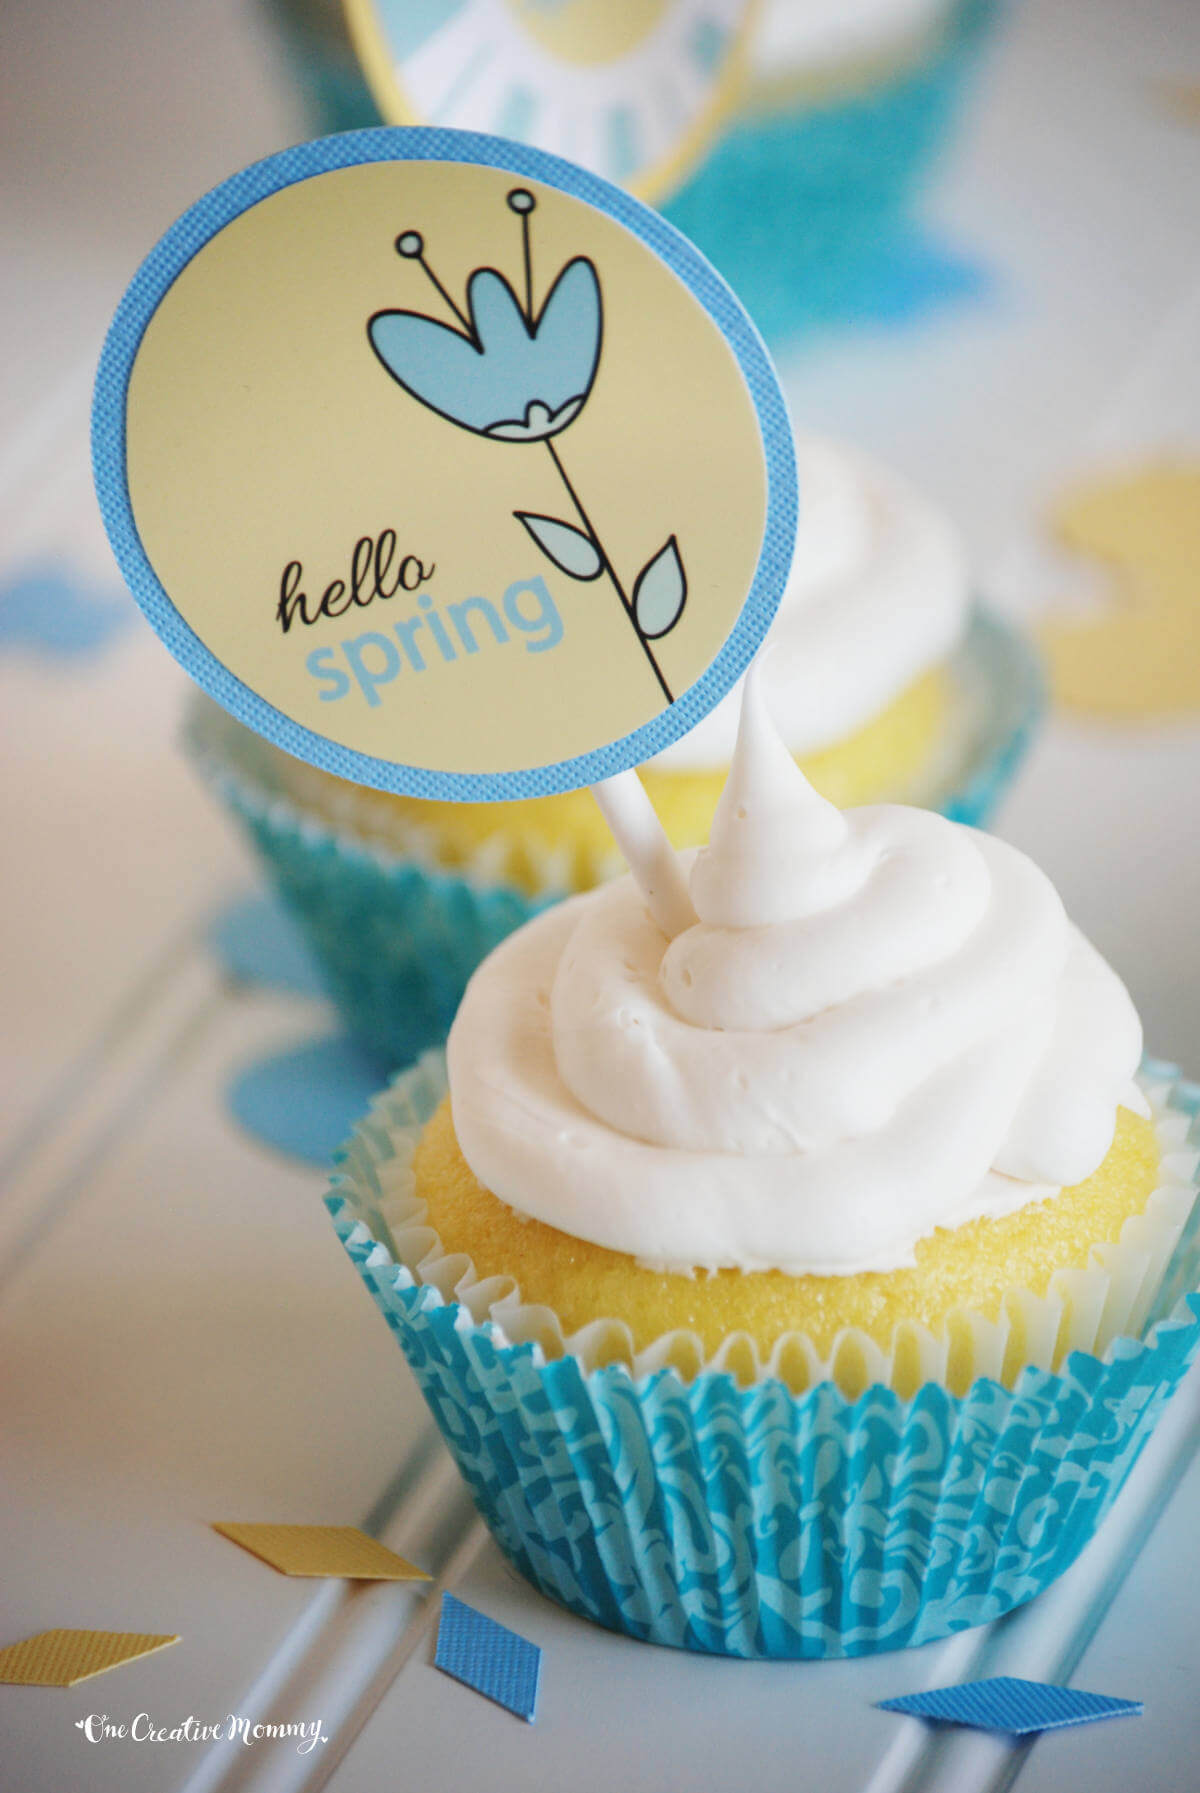 A cute spring cupcake topper spears a delicious-looking gluten free lemon pound cake cupcake. The topper is pale yellow and blue and says, "Hello Spring" The cupcake is bright yellow, frosted with white frosting, and nestled inside a blue cupcake liner.